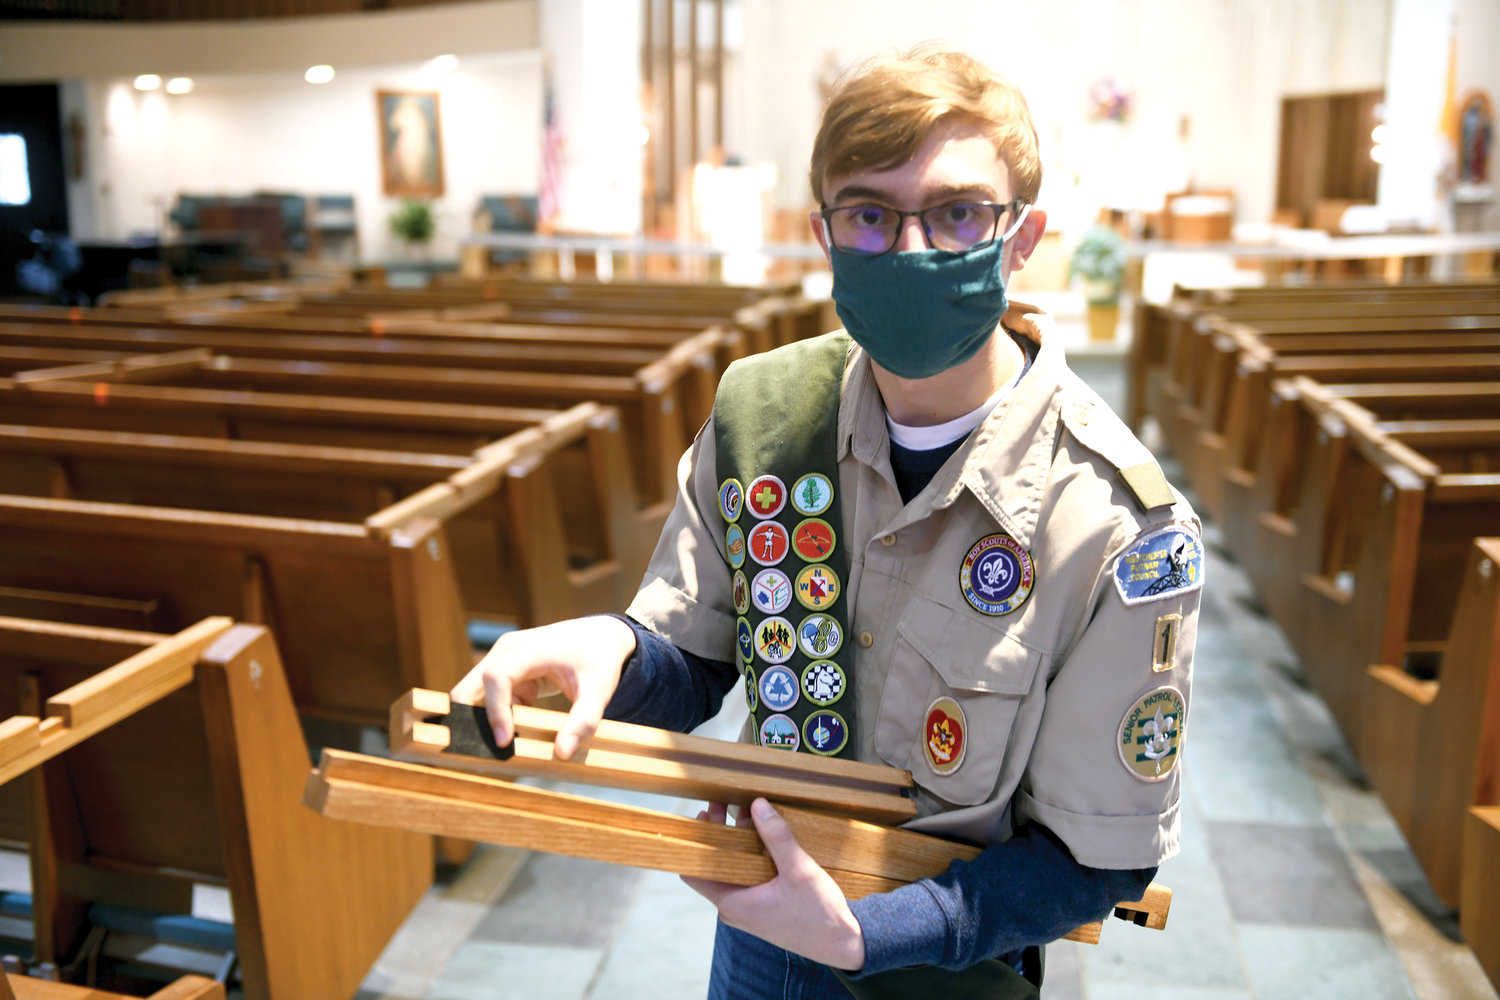 Boy Scout Anthony Decina holds an adjustable rail pew divider he designed and built as part of his comprehensive Eagle Scout project to help his parish church, St. Anthony of Padua in West Harrison, comply with social distancing measures during the Covid-19 pandemic.